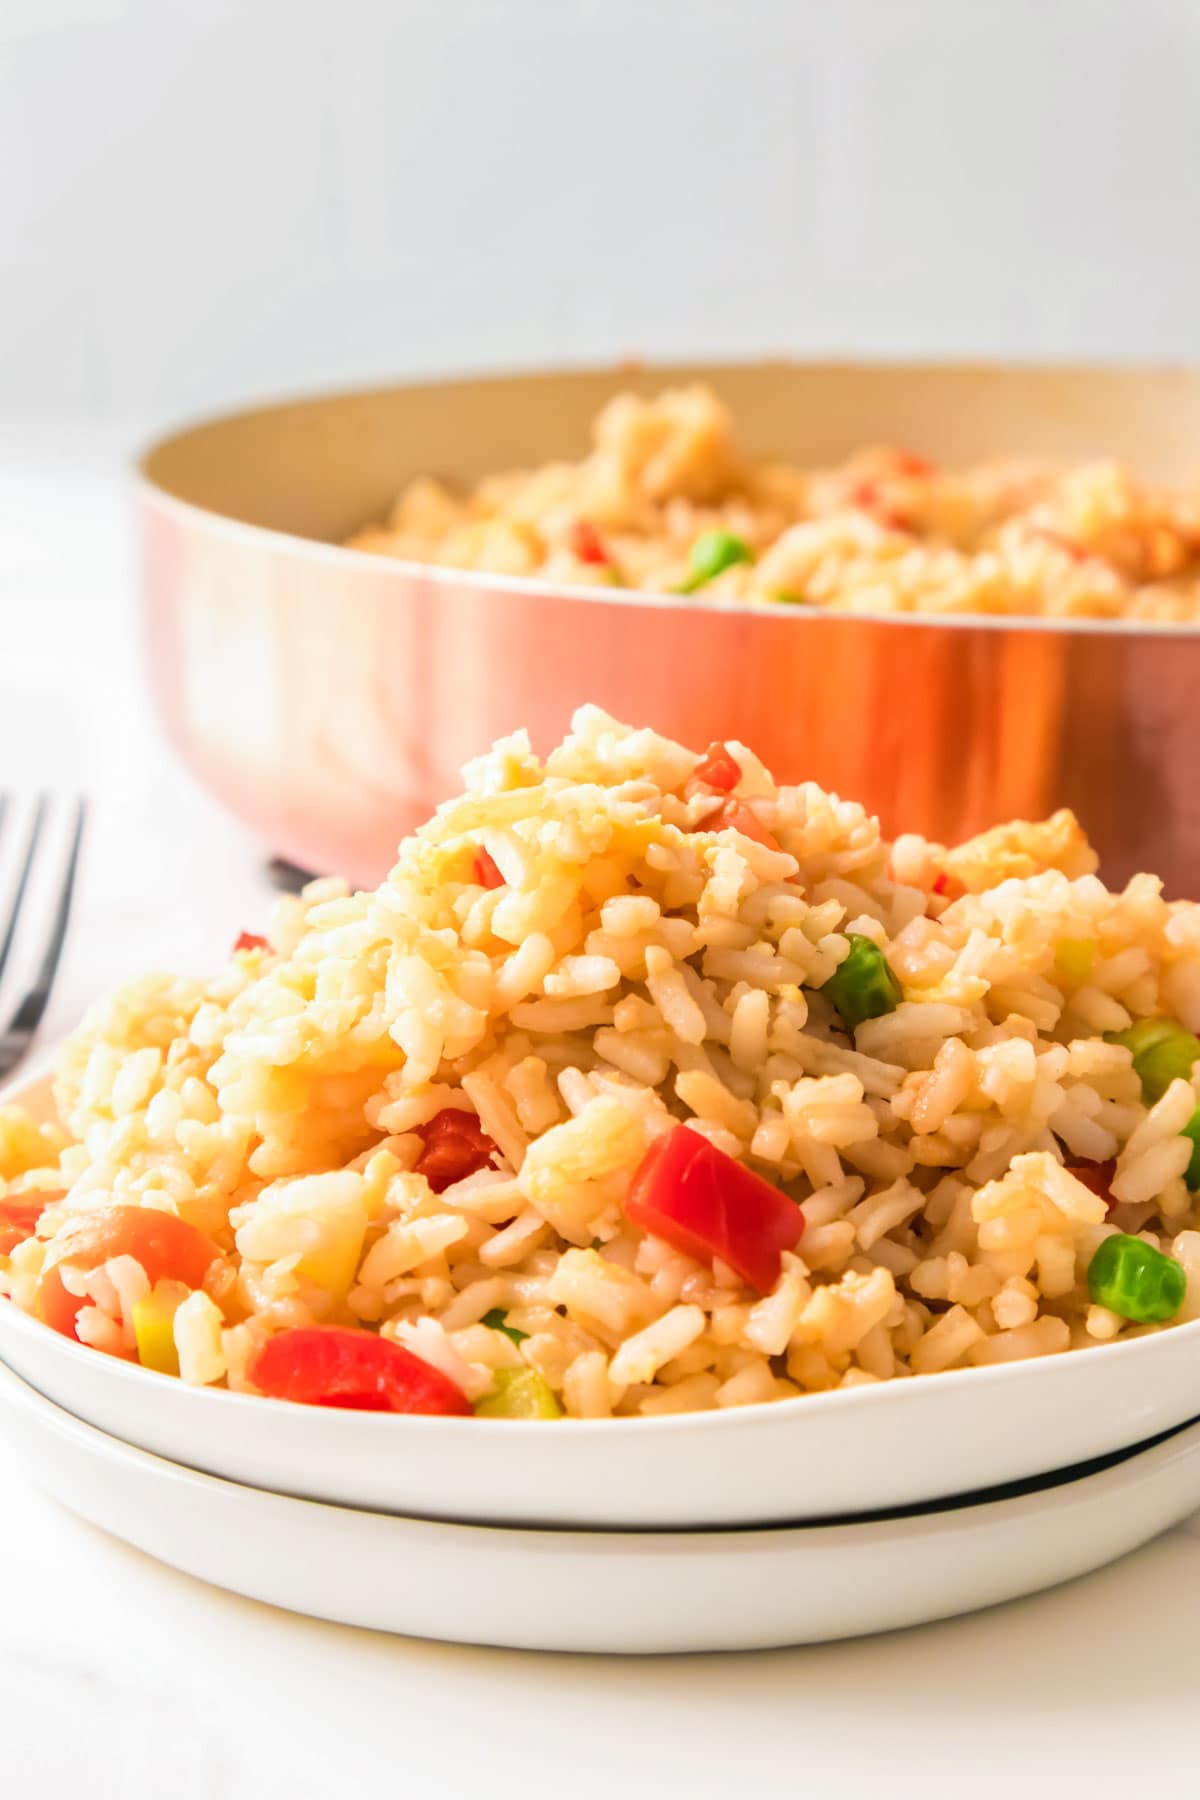 Once you know how to make fried rice, it's so easy! A big plate full of homemade fried rice, with a copper pot of fried rice in the background.